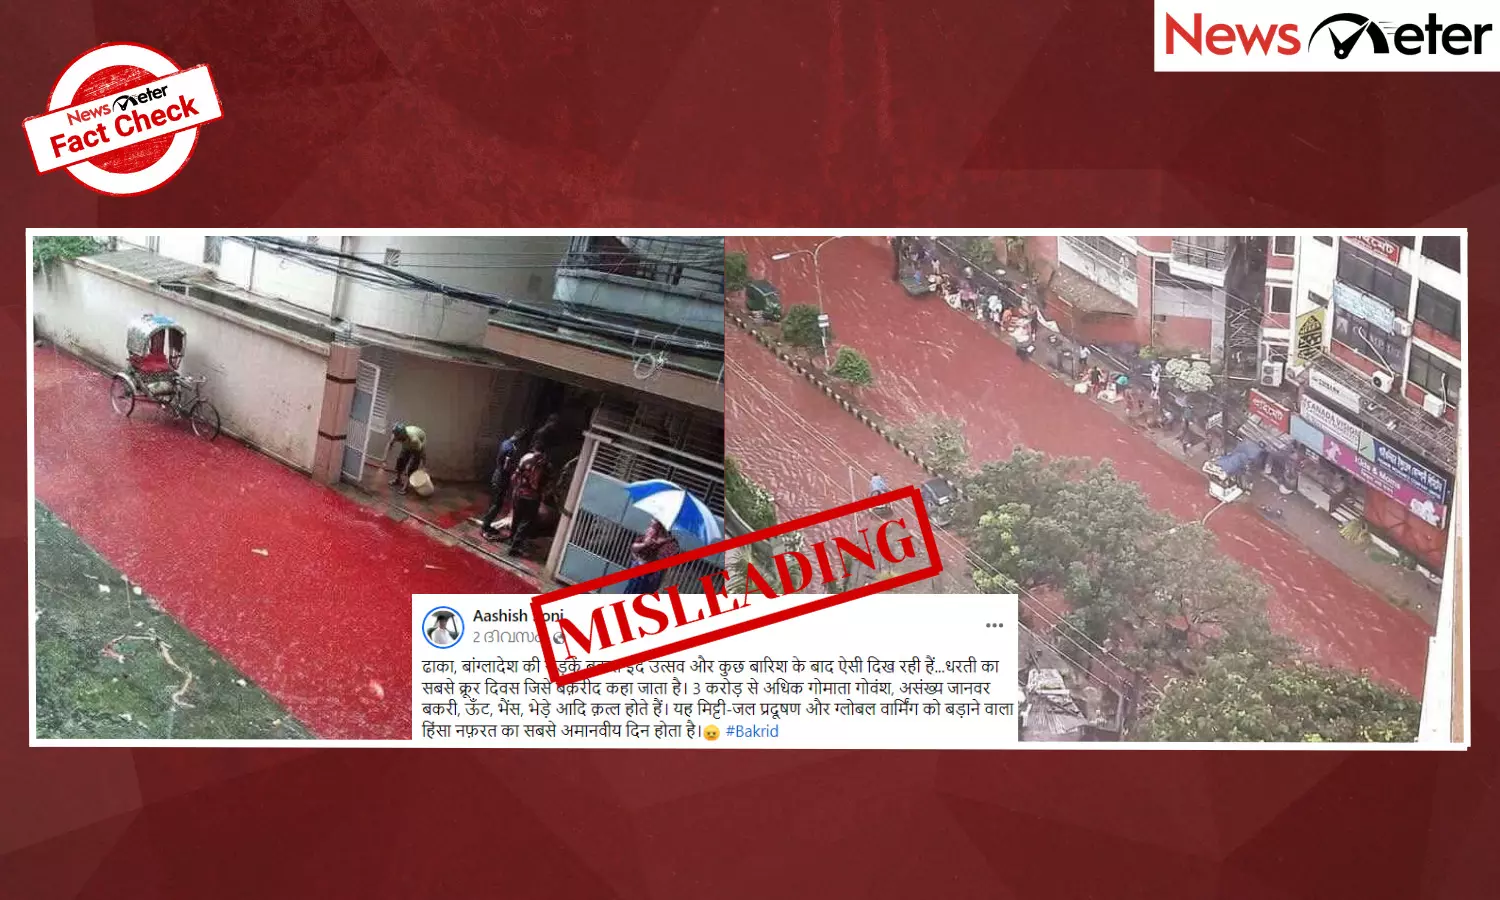 Fact Check: Old images of red water pool in Dhaka resurface on Bakrid